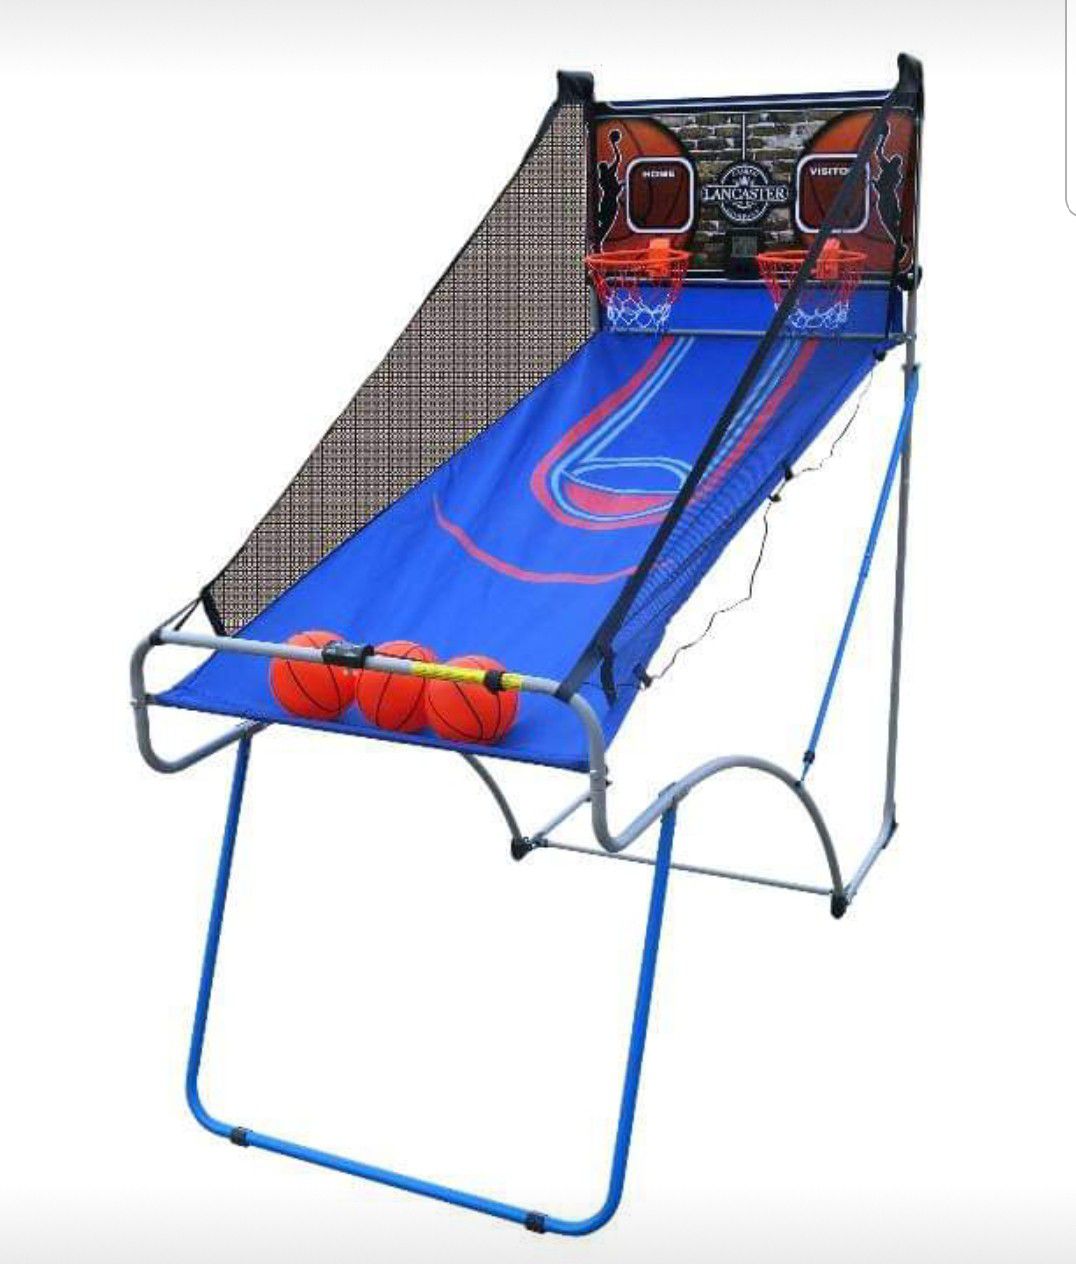 New Kids Sports EZ-Fold 2 Player Indoor Arcade Basketball Game, good for game room or play room